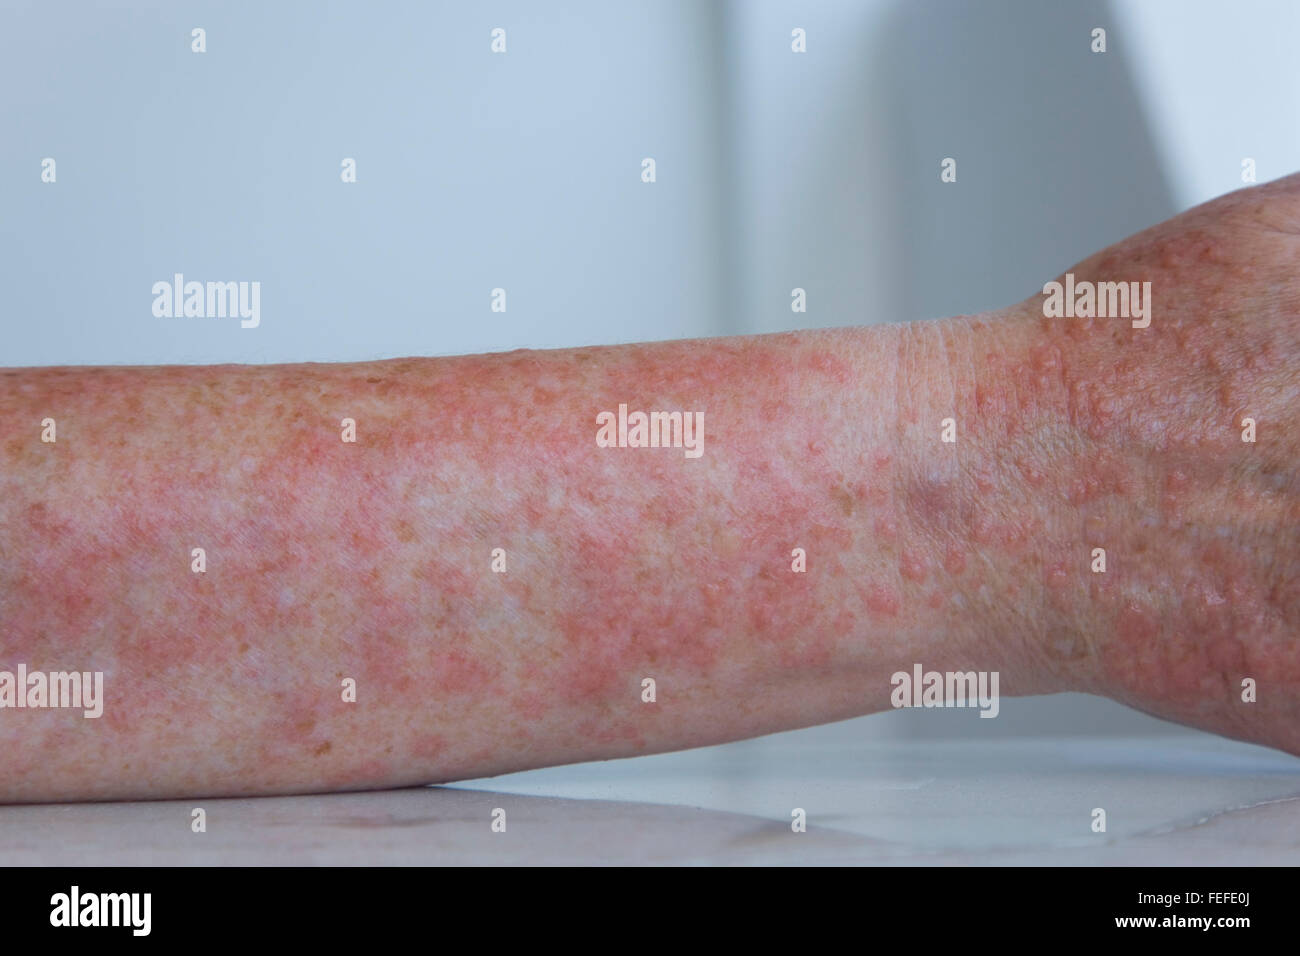 Woman's forearm exhibiting the itchy rash associated with a severe case of polymorphic light eruption. Stock Photo